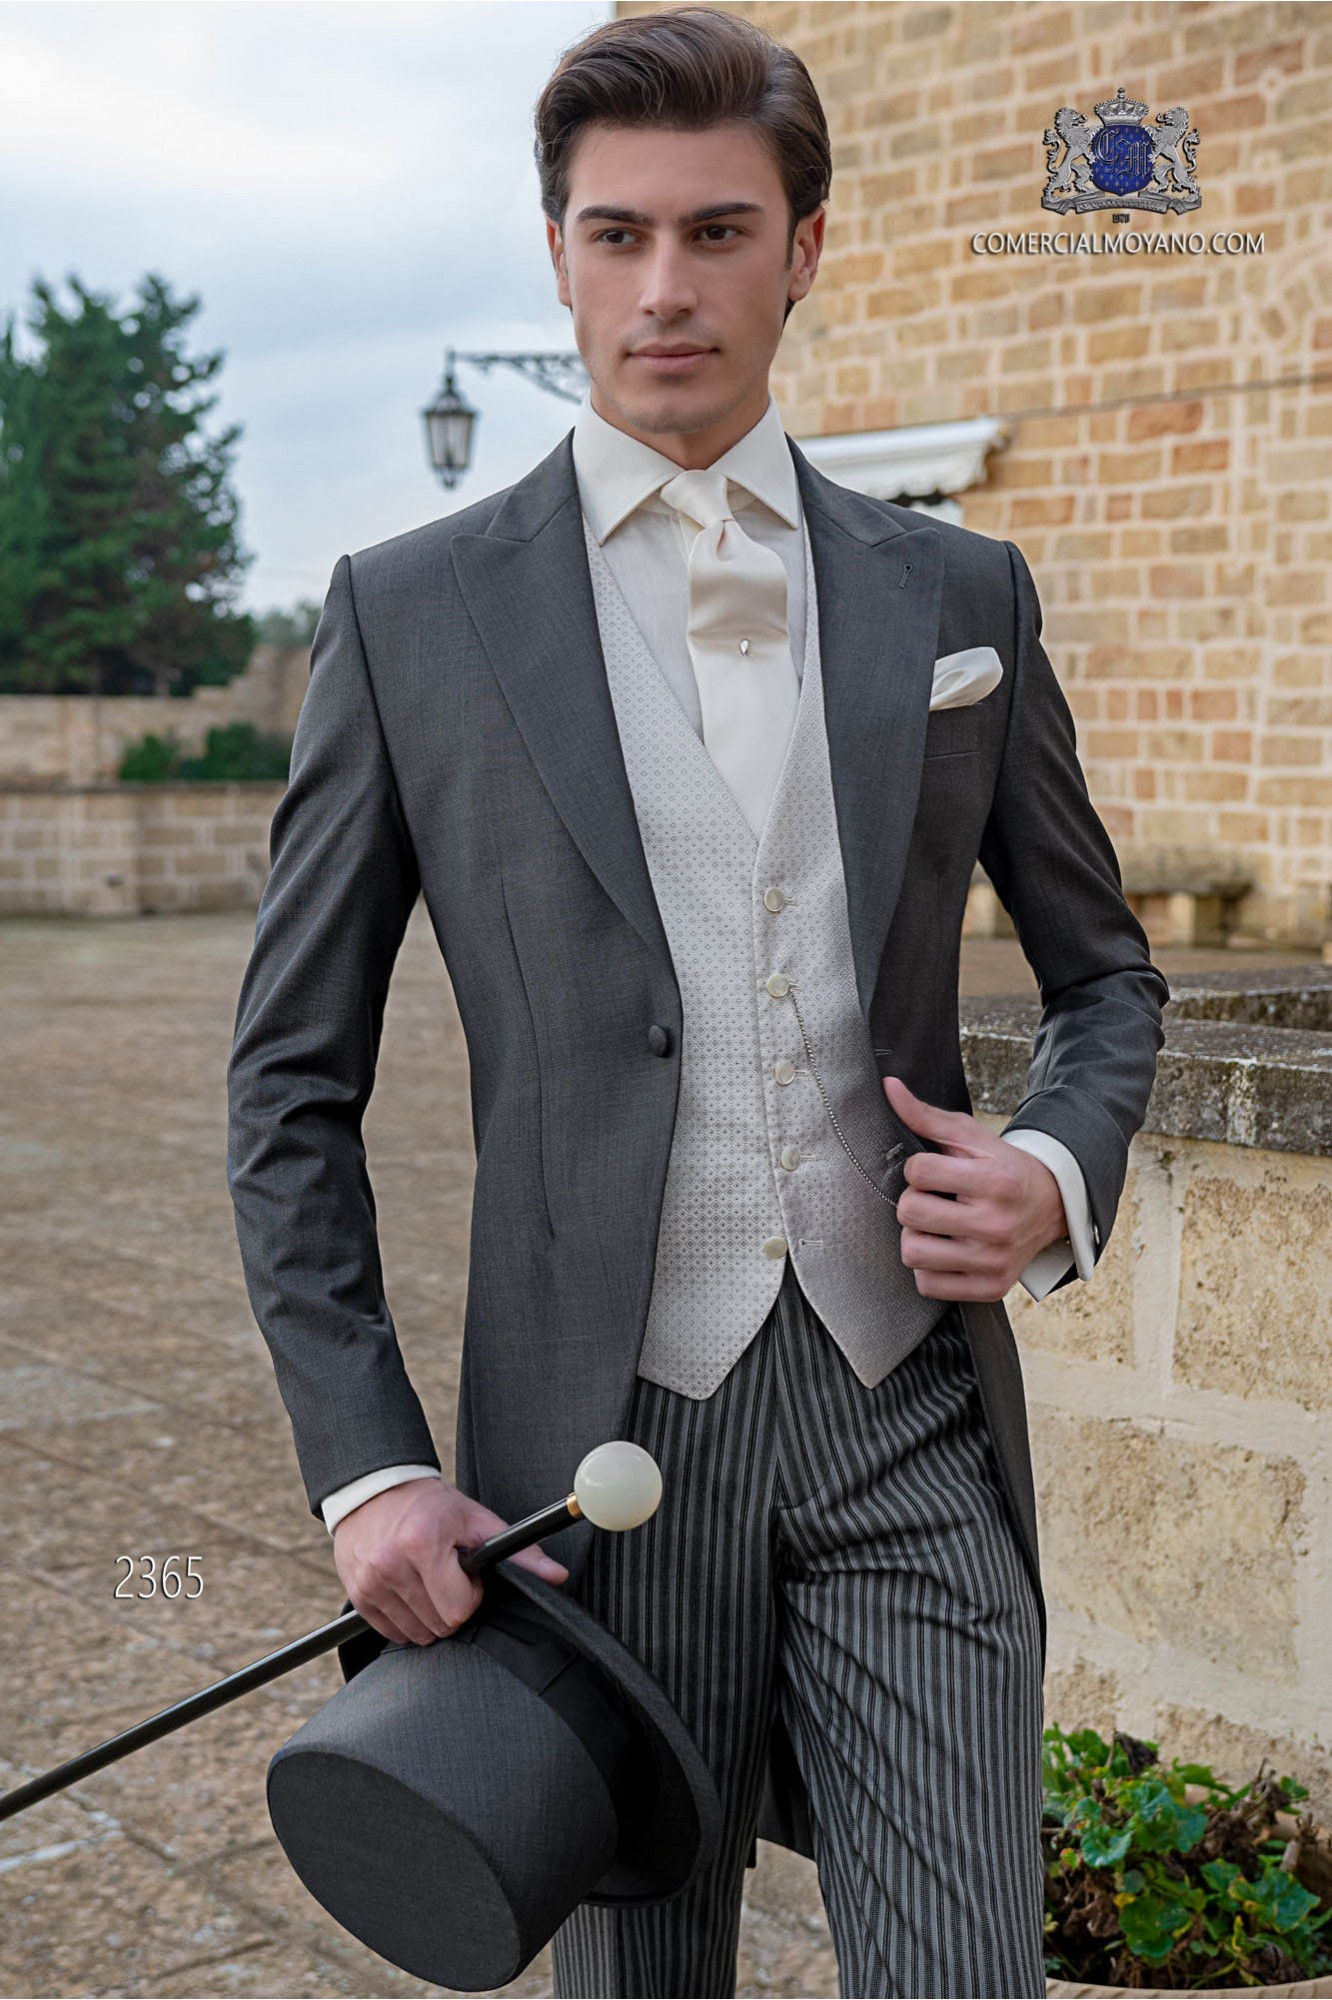 Morning suit mohair wool mix fil a fil anthracite grey with pinstripe trousers